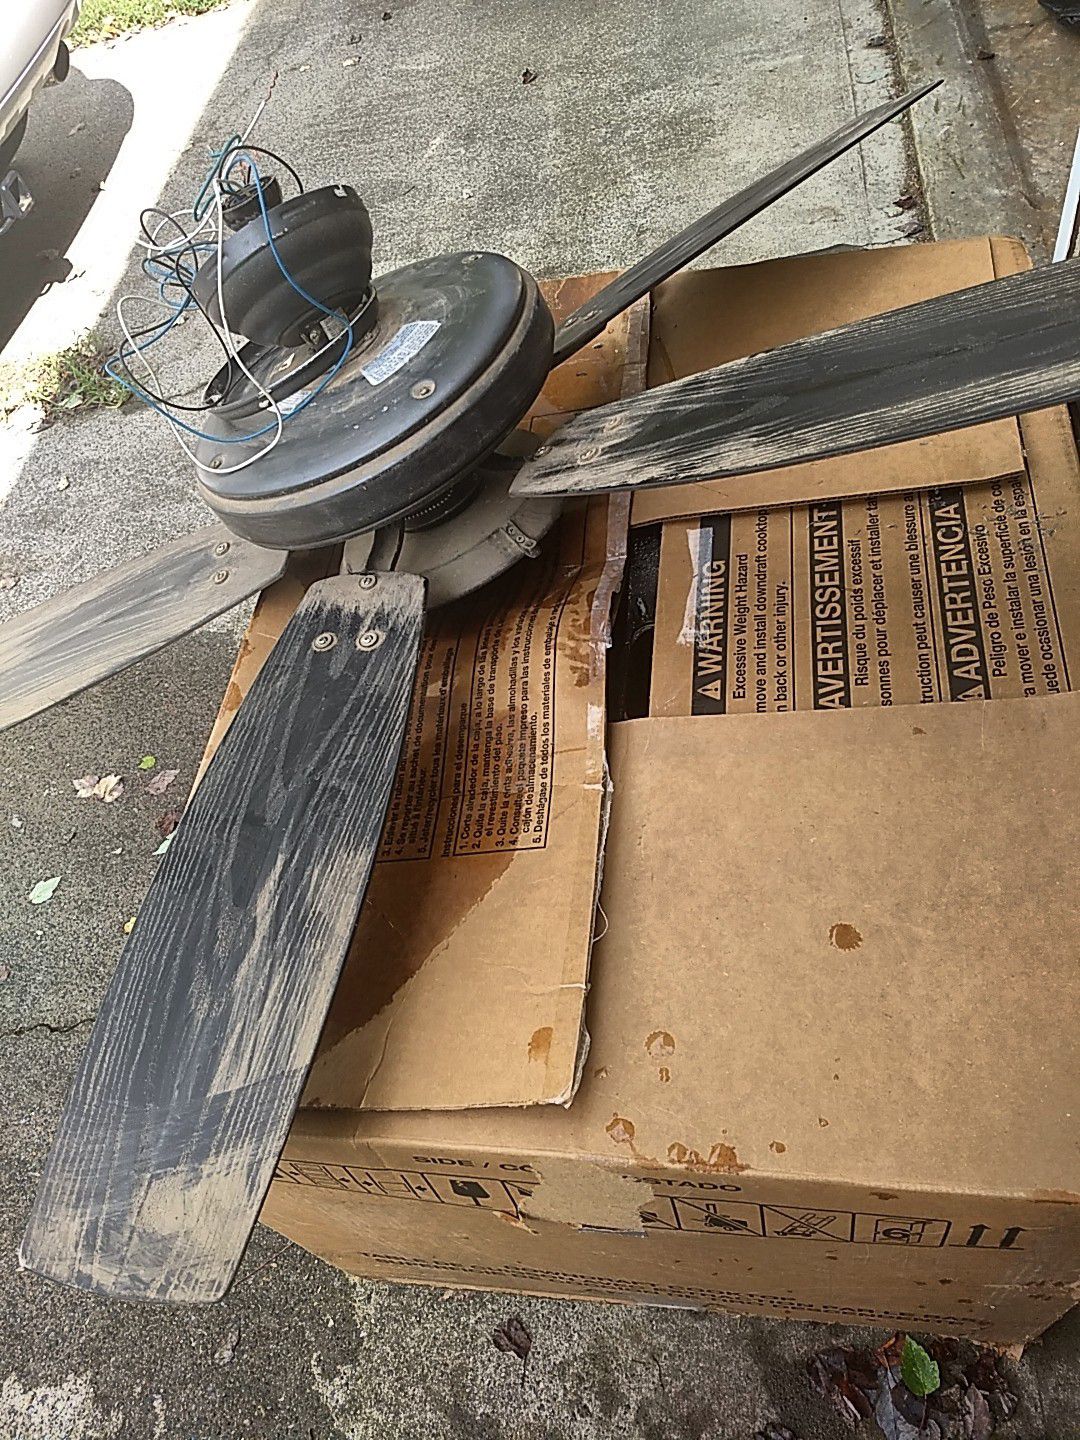 Free outdoor ceiling fan and Cooktop!